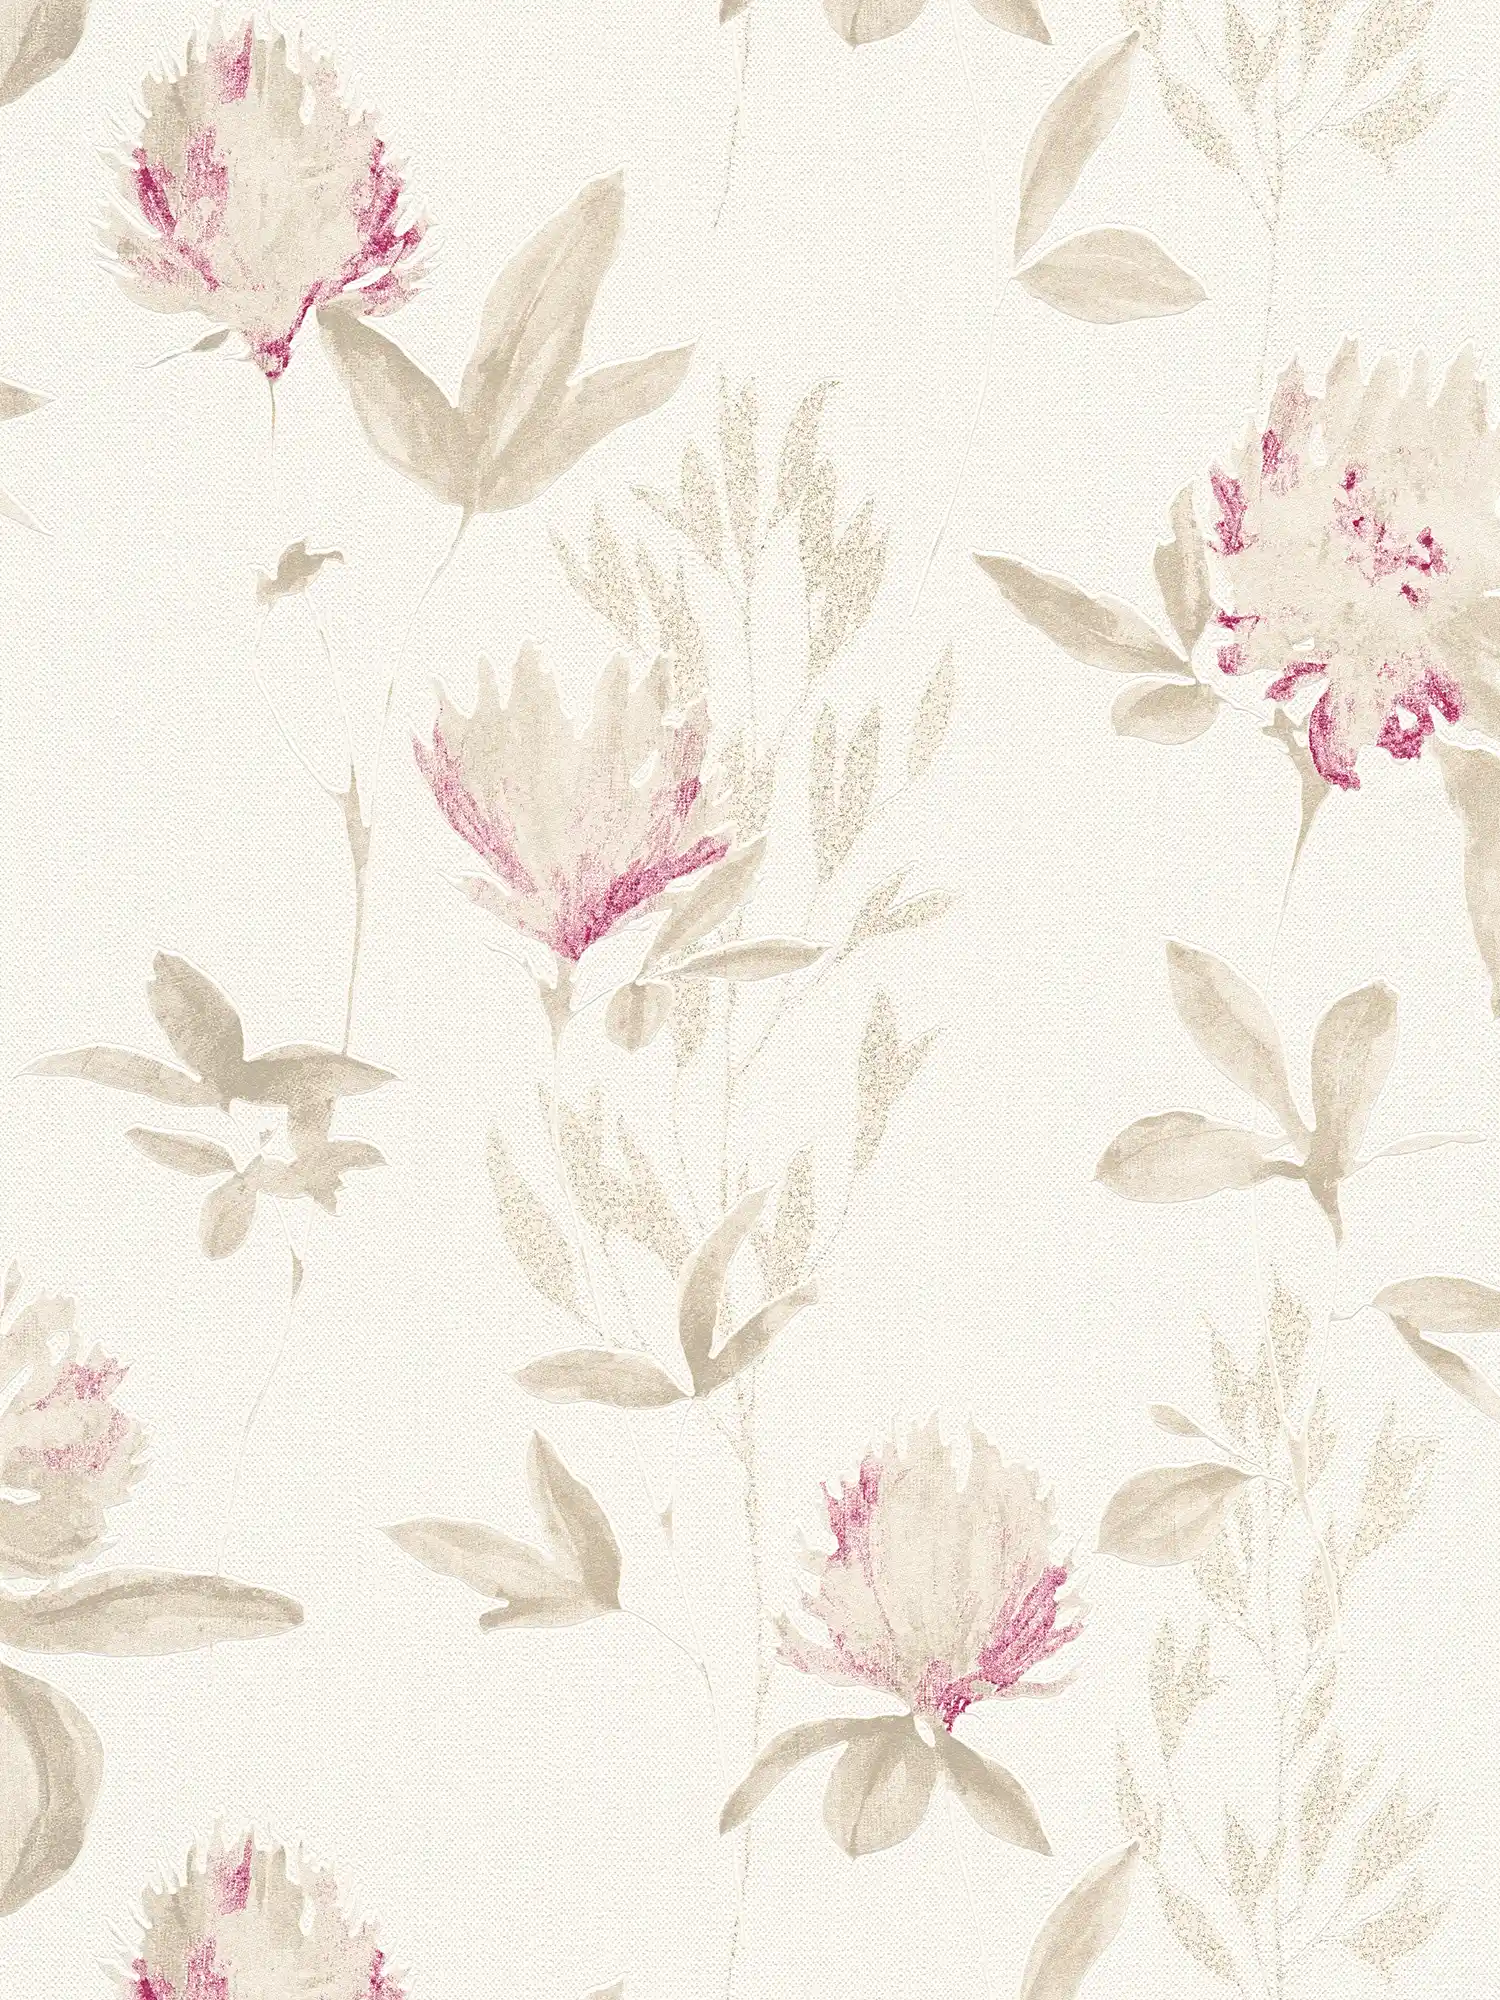 Abstract floral non-woven wallpaper with pink accents - beige, purple
